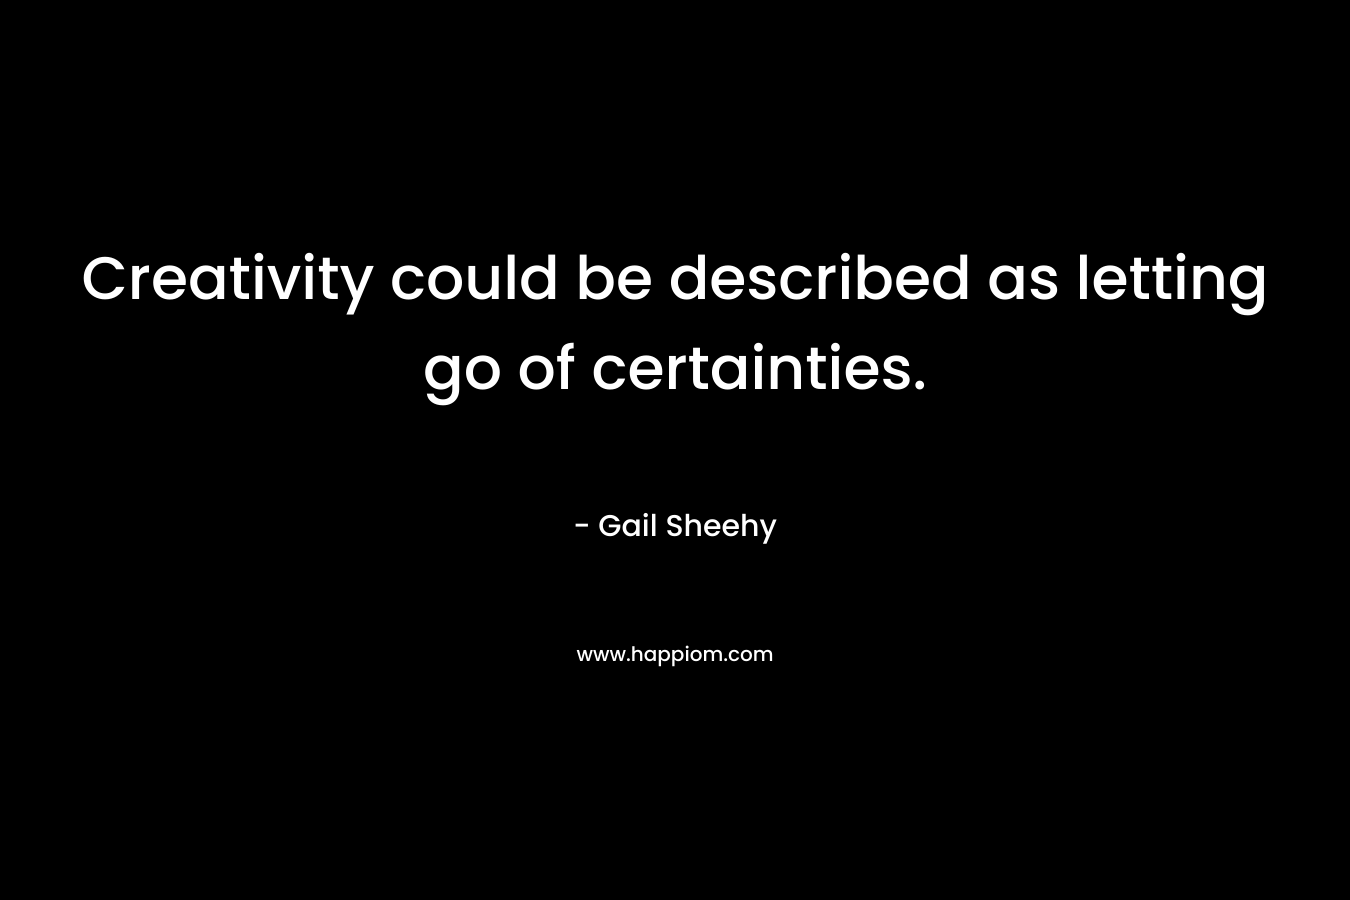 Creativity could be described as letting go of certainties.